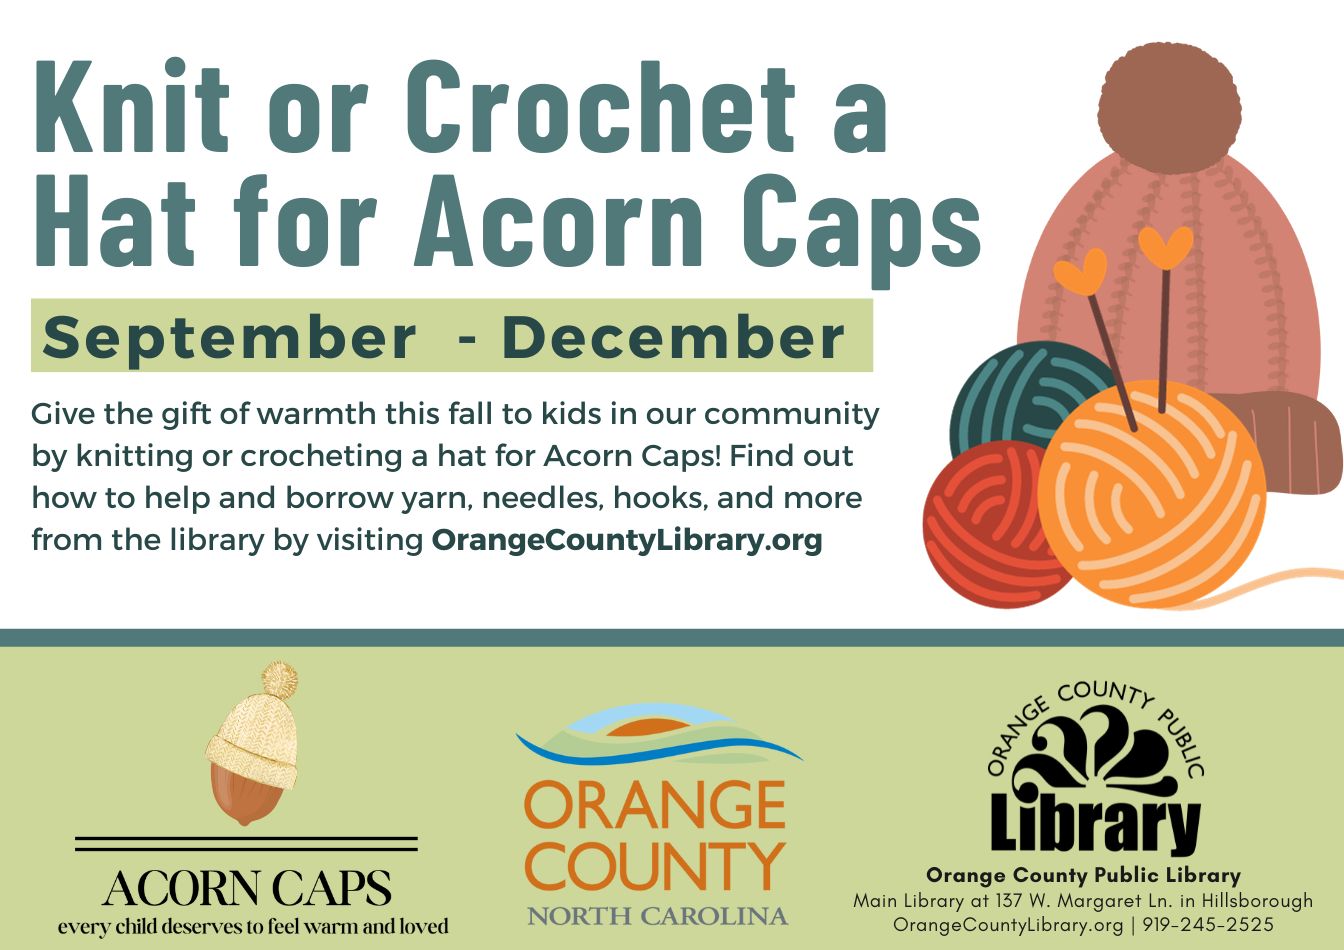 Knit or Crochet a Hat for a Acorn Caps